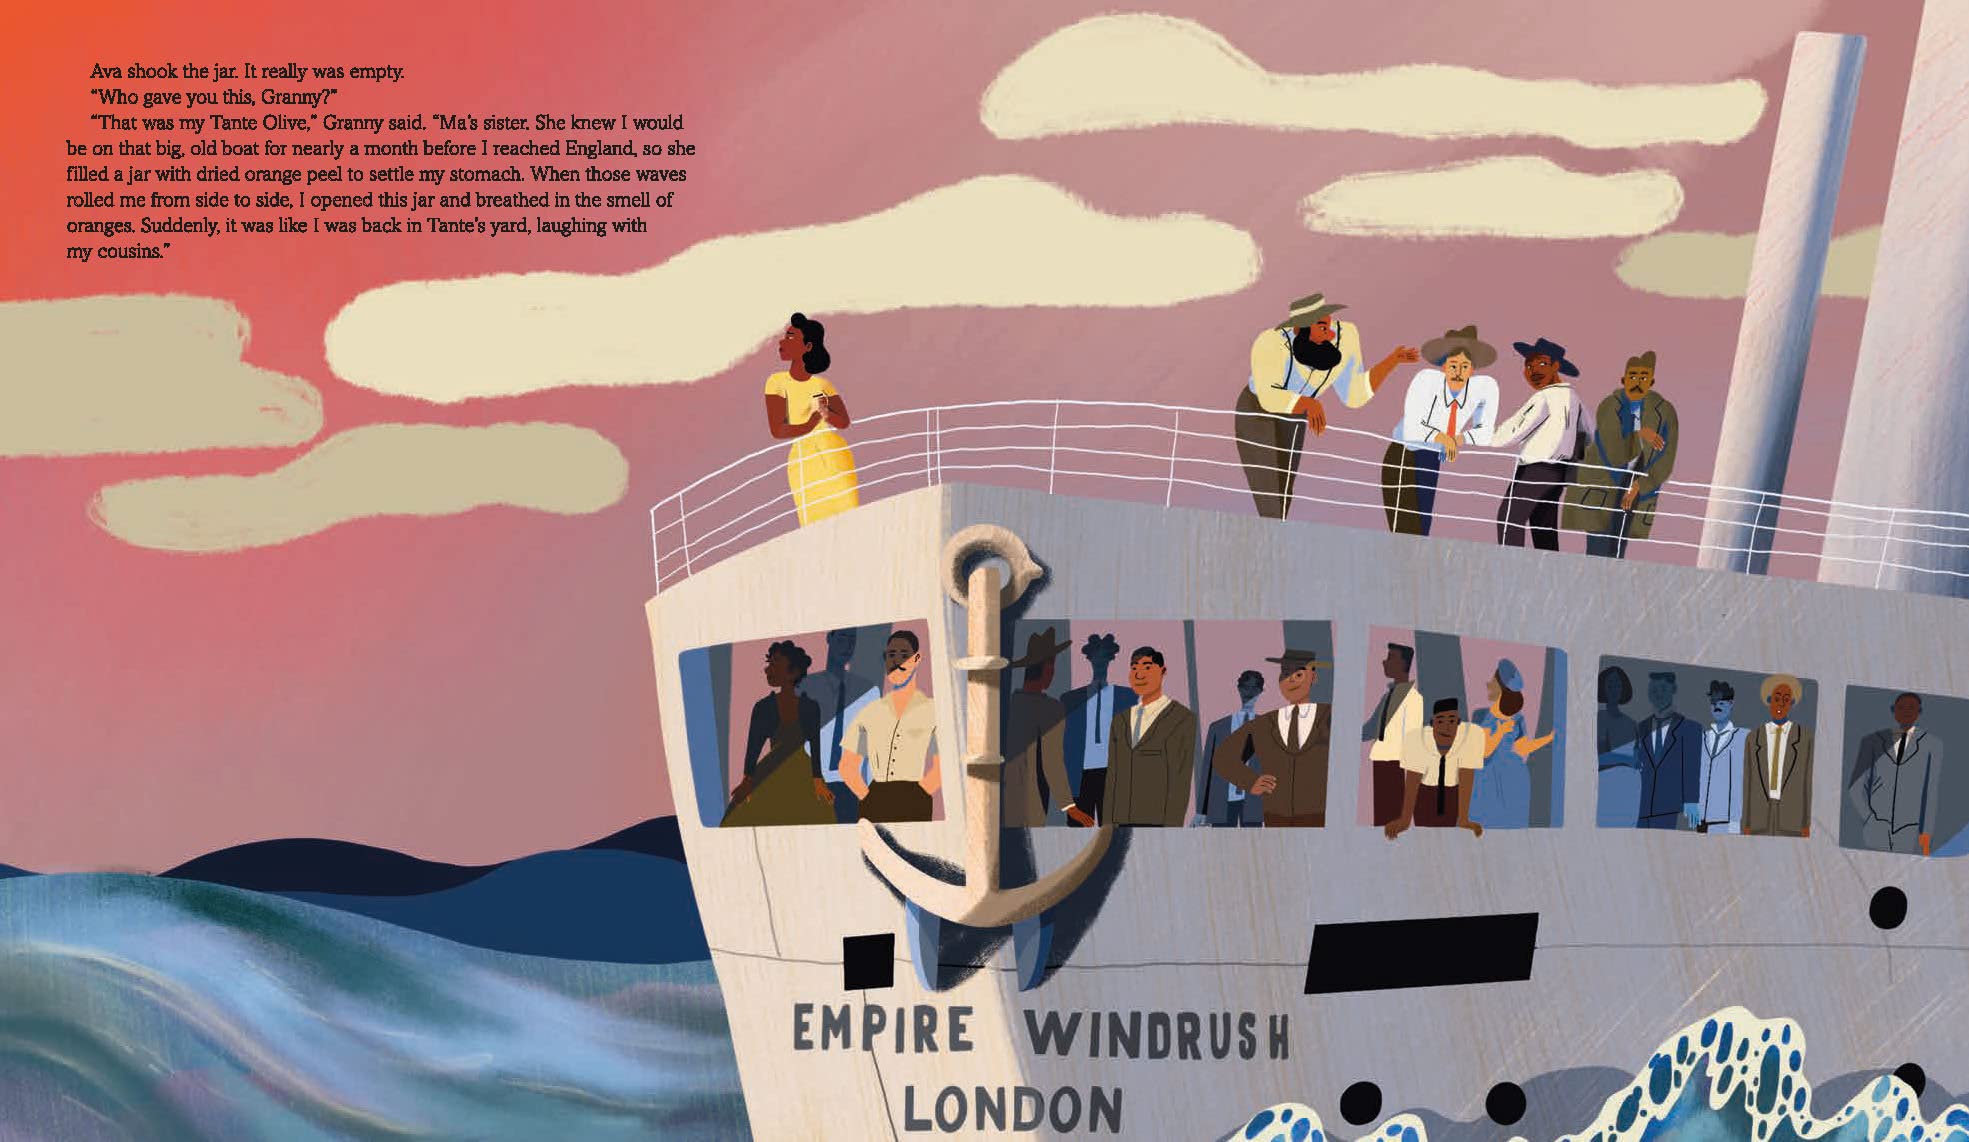 Patrice Lawrence: Granny Came Here on the Empire Windrush